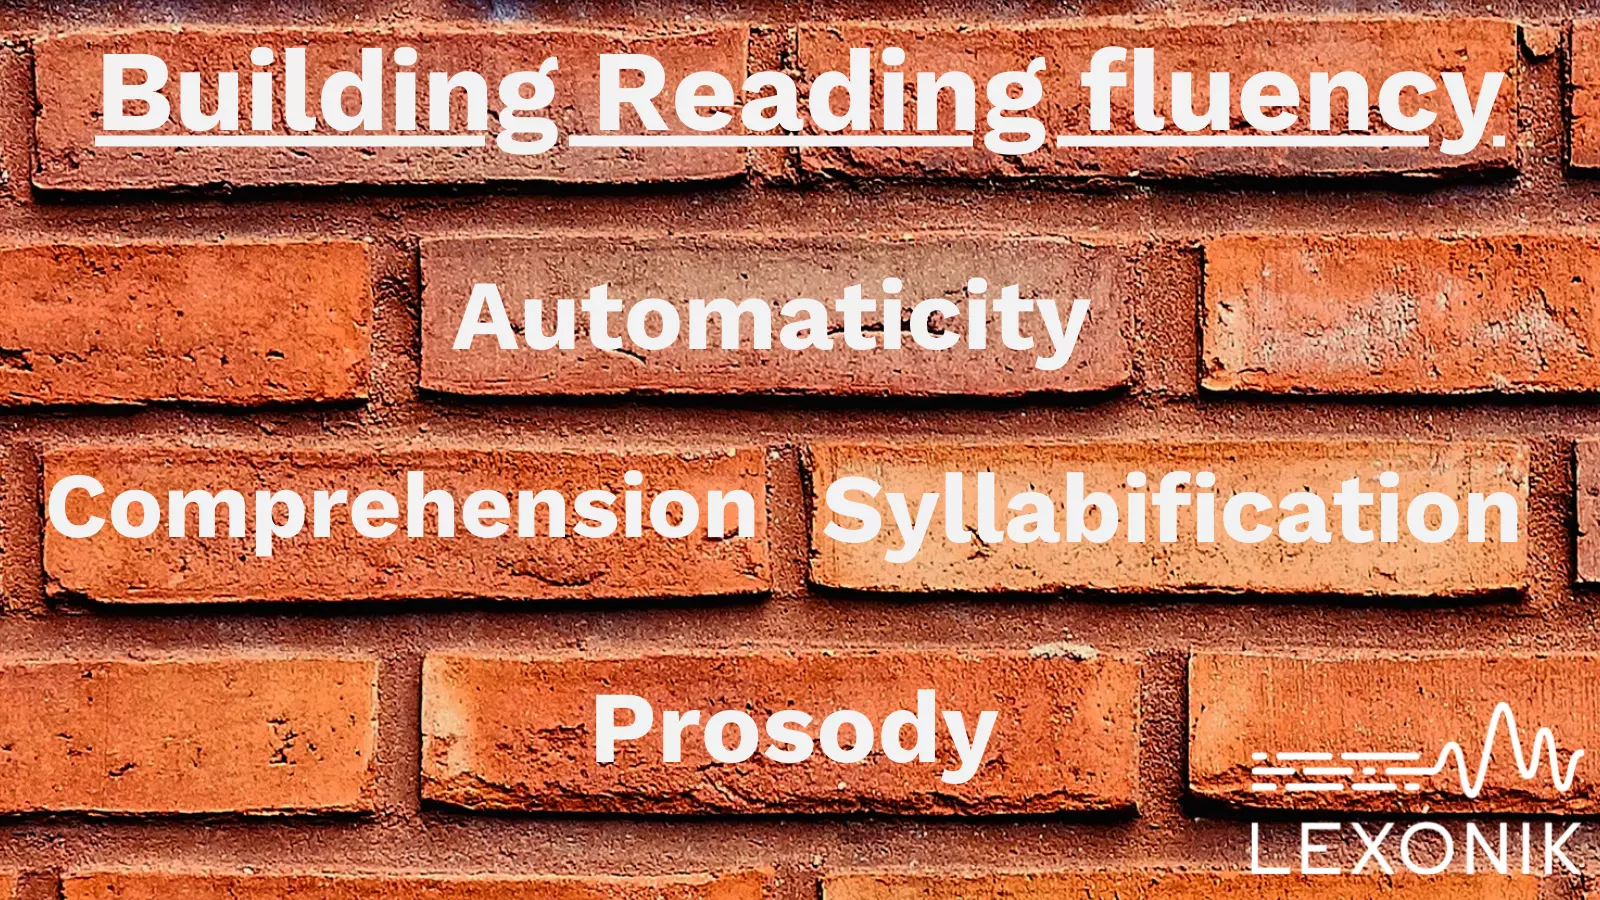 A graphic showing the different skills required to build reading fluency